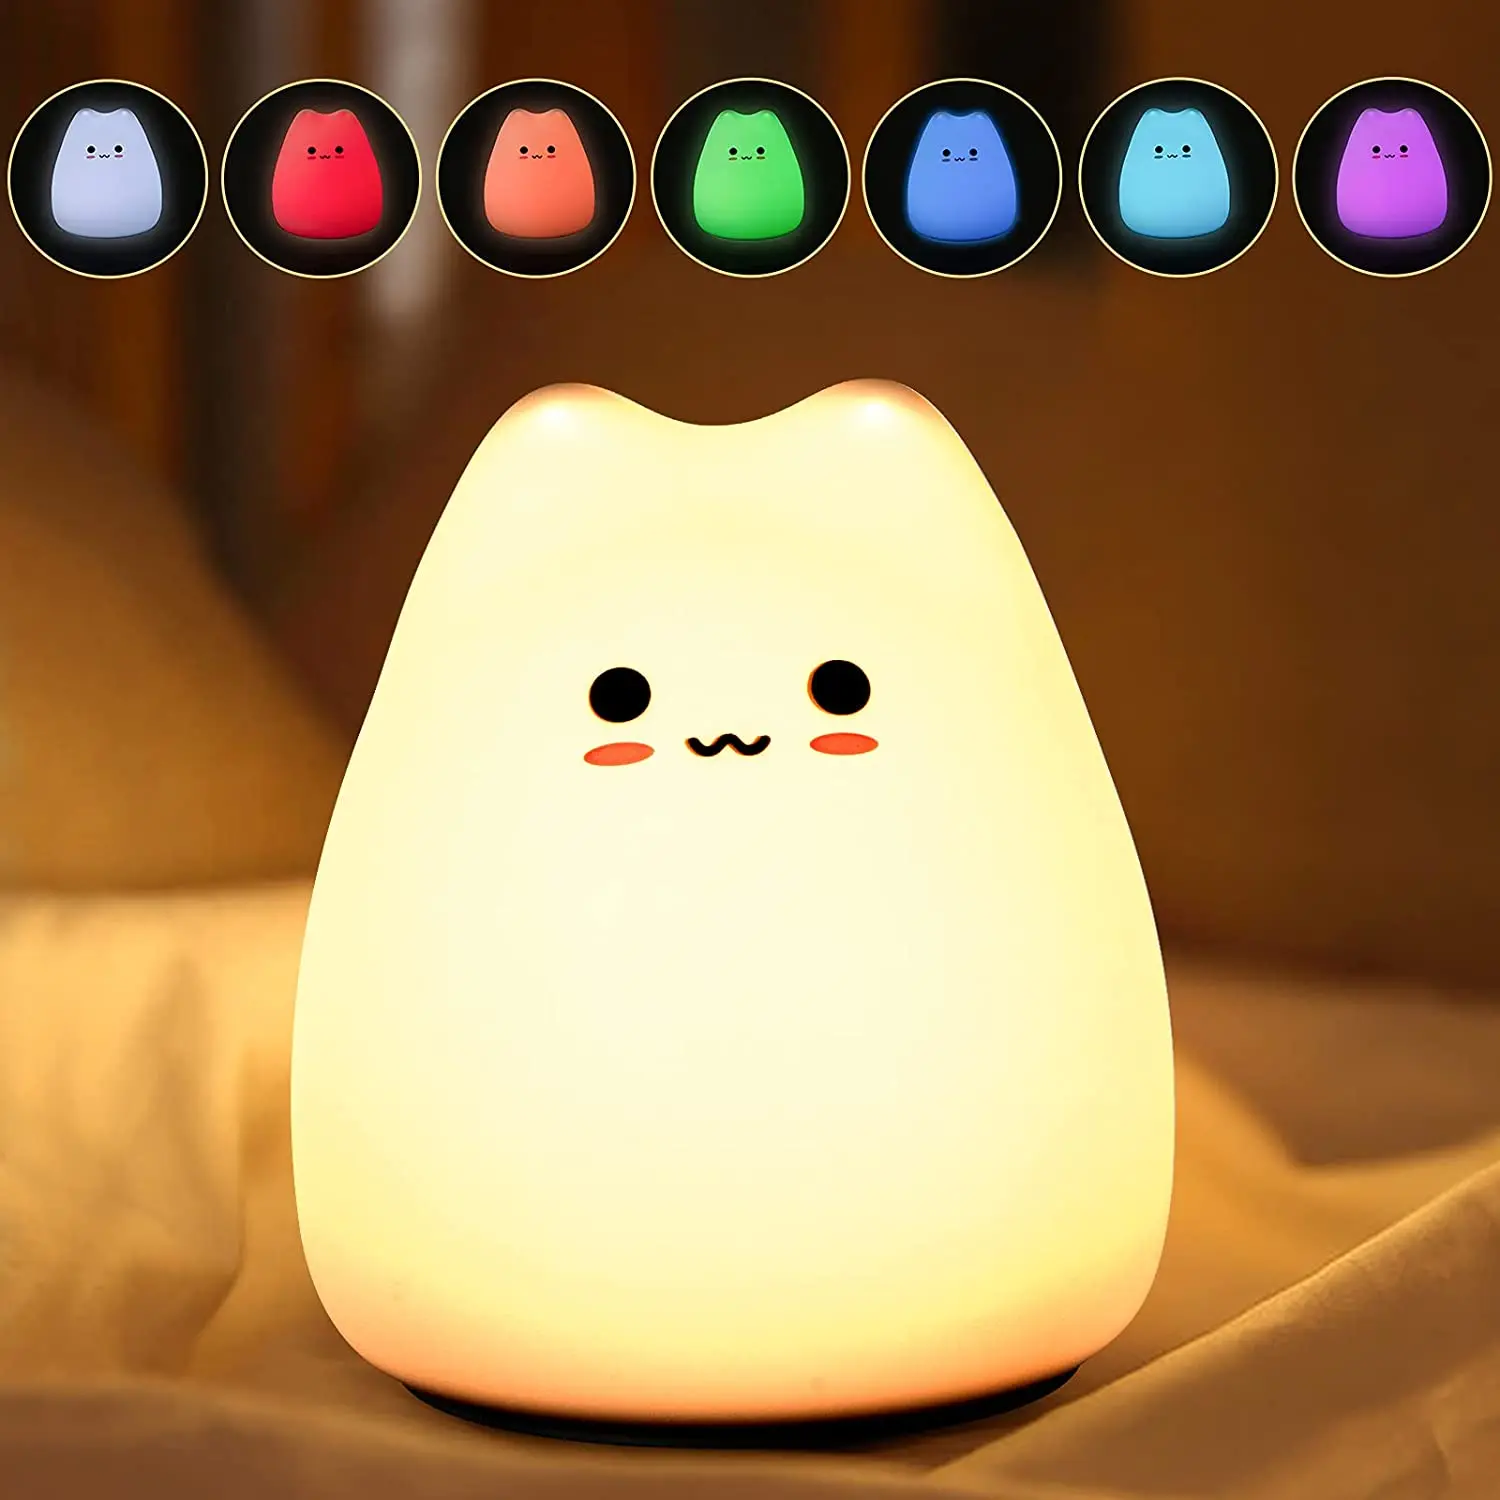 

Battery Powered Silicone Cute Cat LED Night Light Lamp with Warm White and 7-Color Breathing Modes for Kids Baby Children Gifts